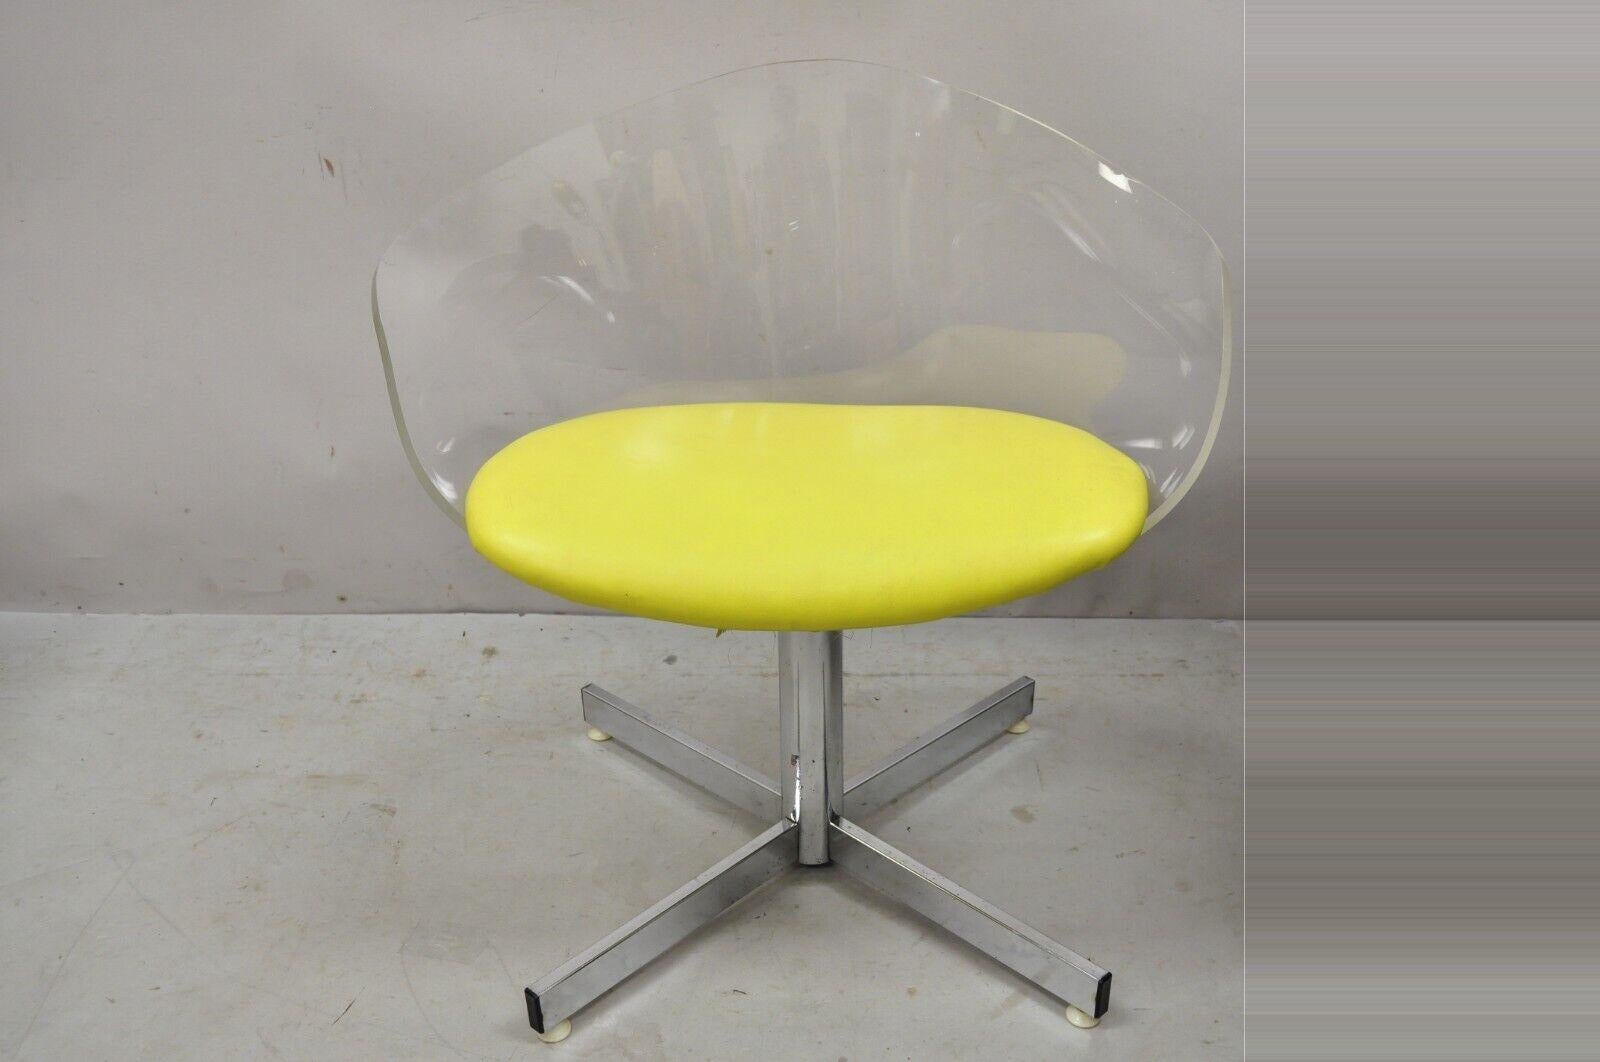 Vintage Jansko clear sculpted Lucite Mid-Century Modern yellow Vinyl swivel chair. Item features a swivel seat, sculptural clear lucite frame, chrome pedestal base, original label, very nice vintage item, great style and form. Circa mid 20th